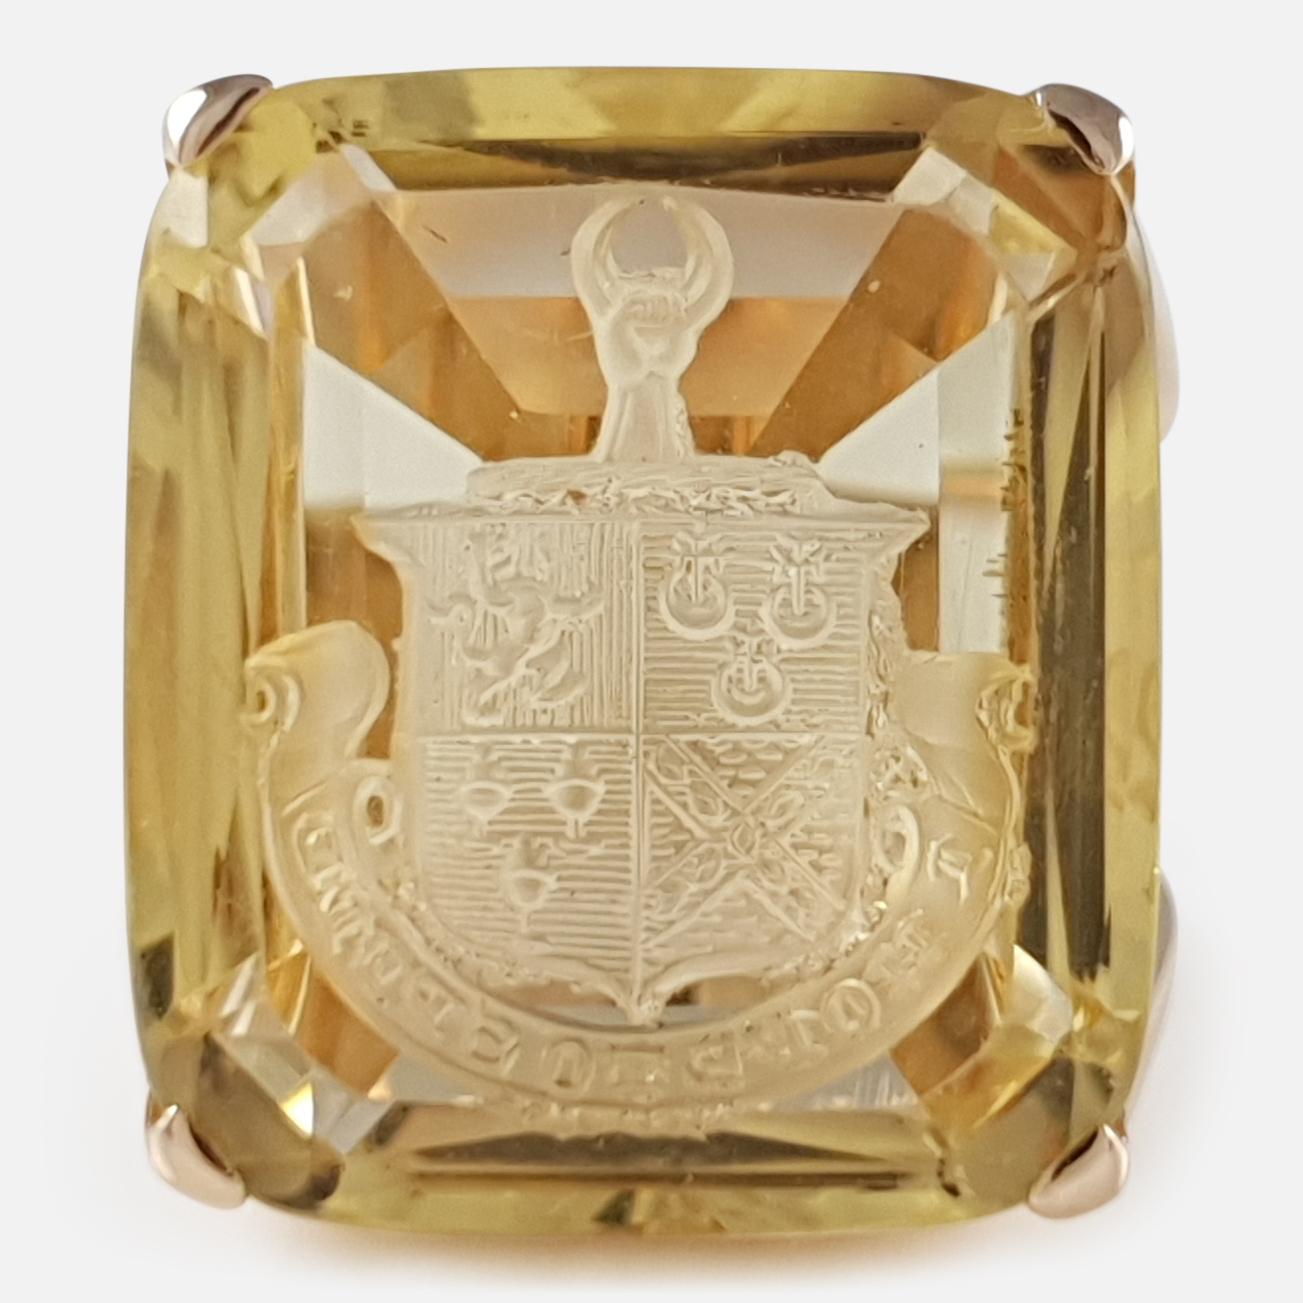 Description: - A superb 18 karat yellow gold & 18.85cts citrine cocktail seal ring - circa 1930s. The citrine is engraved with the Cathcart family crest, and the text 'I HOPE TO SPEED'. The ring has been stamped with modern UK